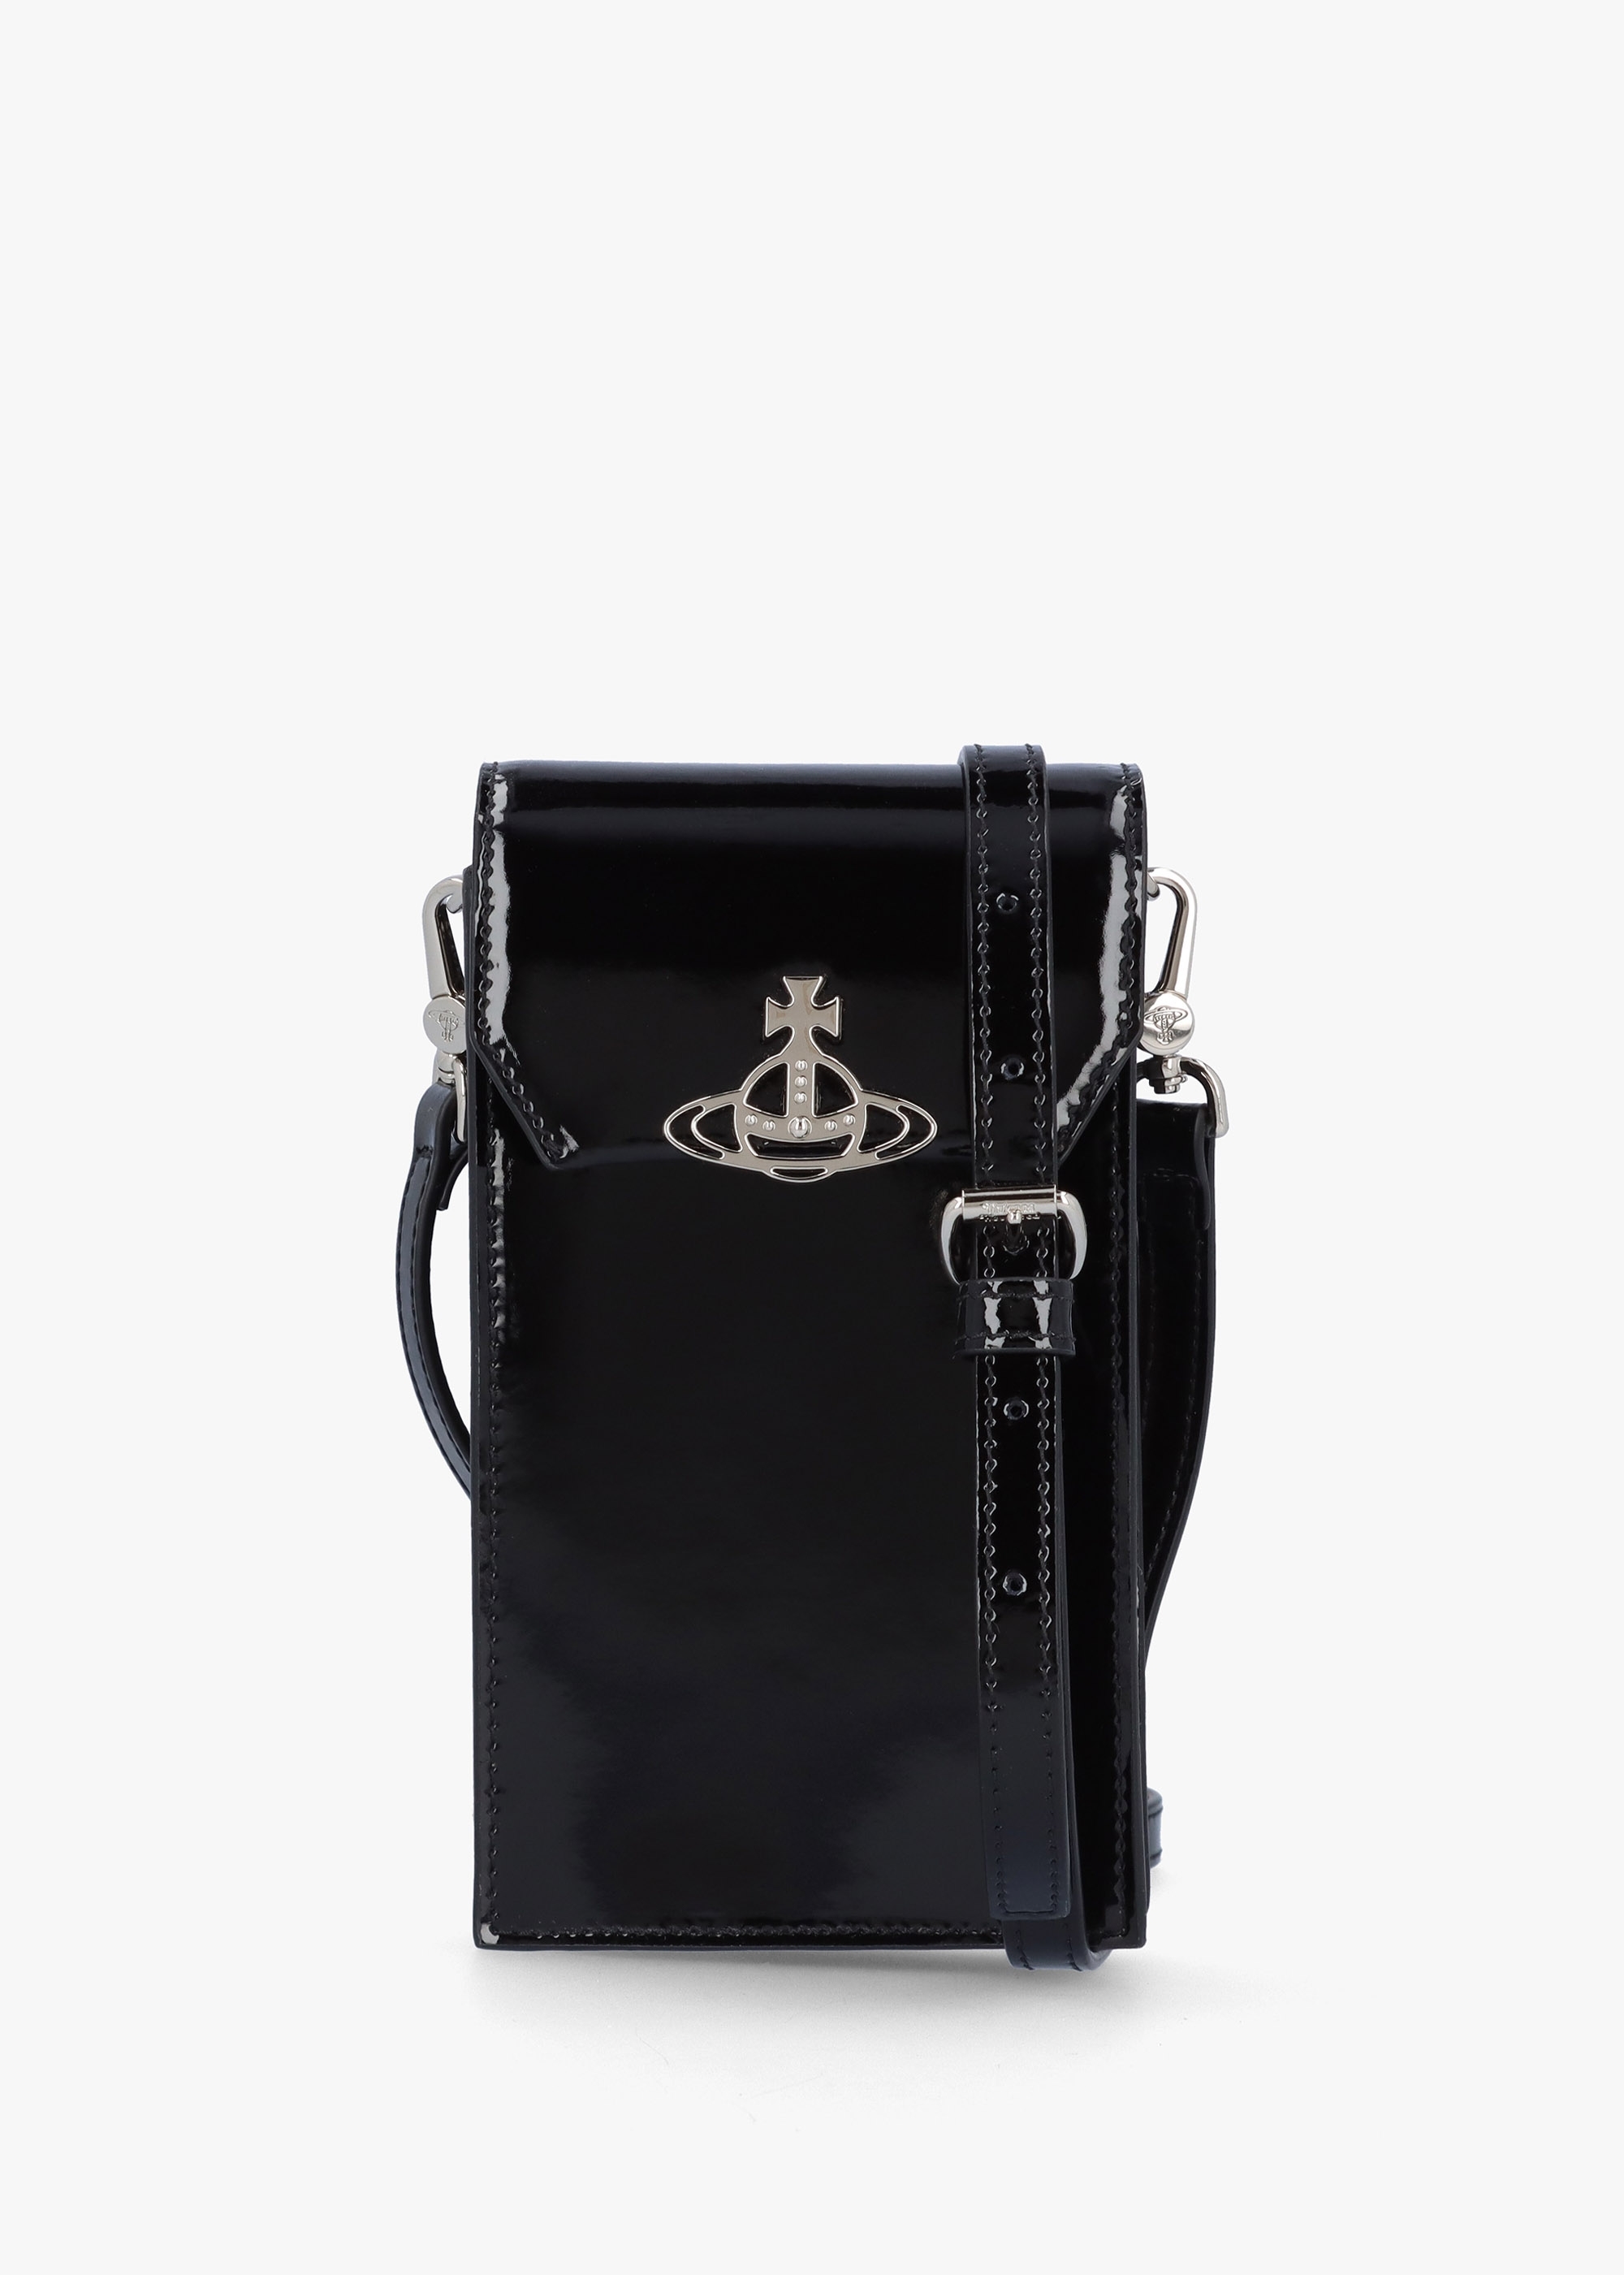 Vivienne Westwood  Womens Leather Phone Bag In Black Patent